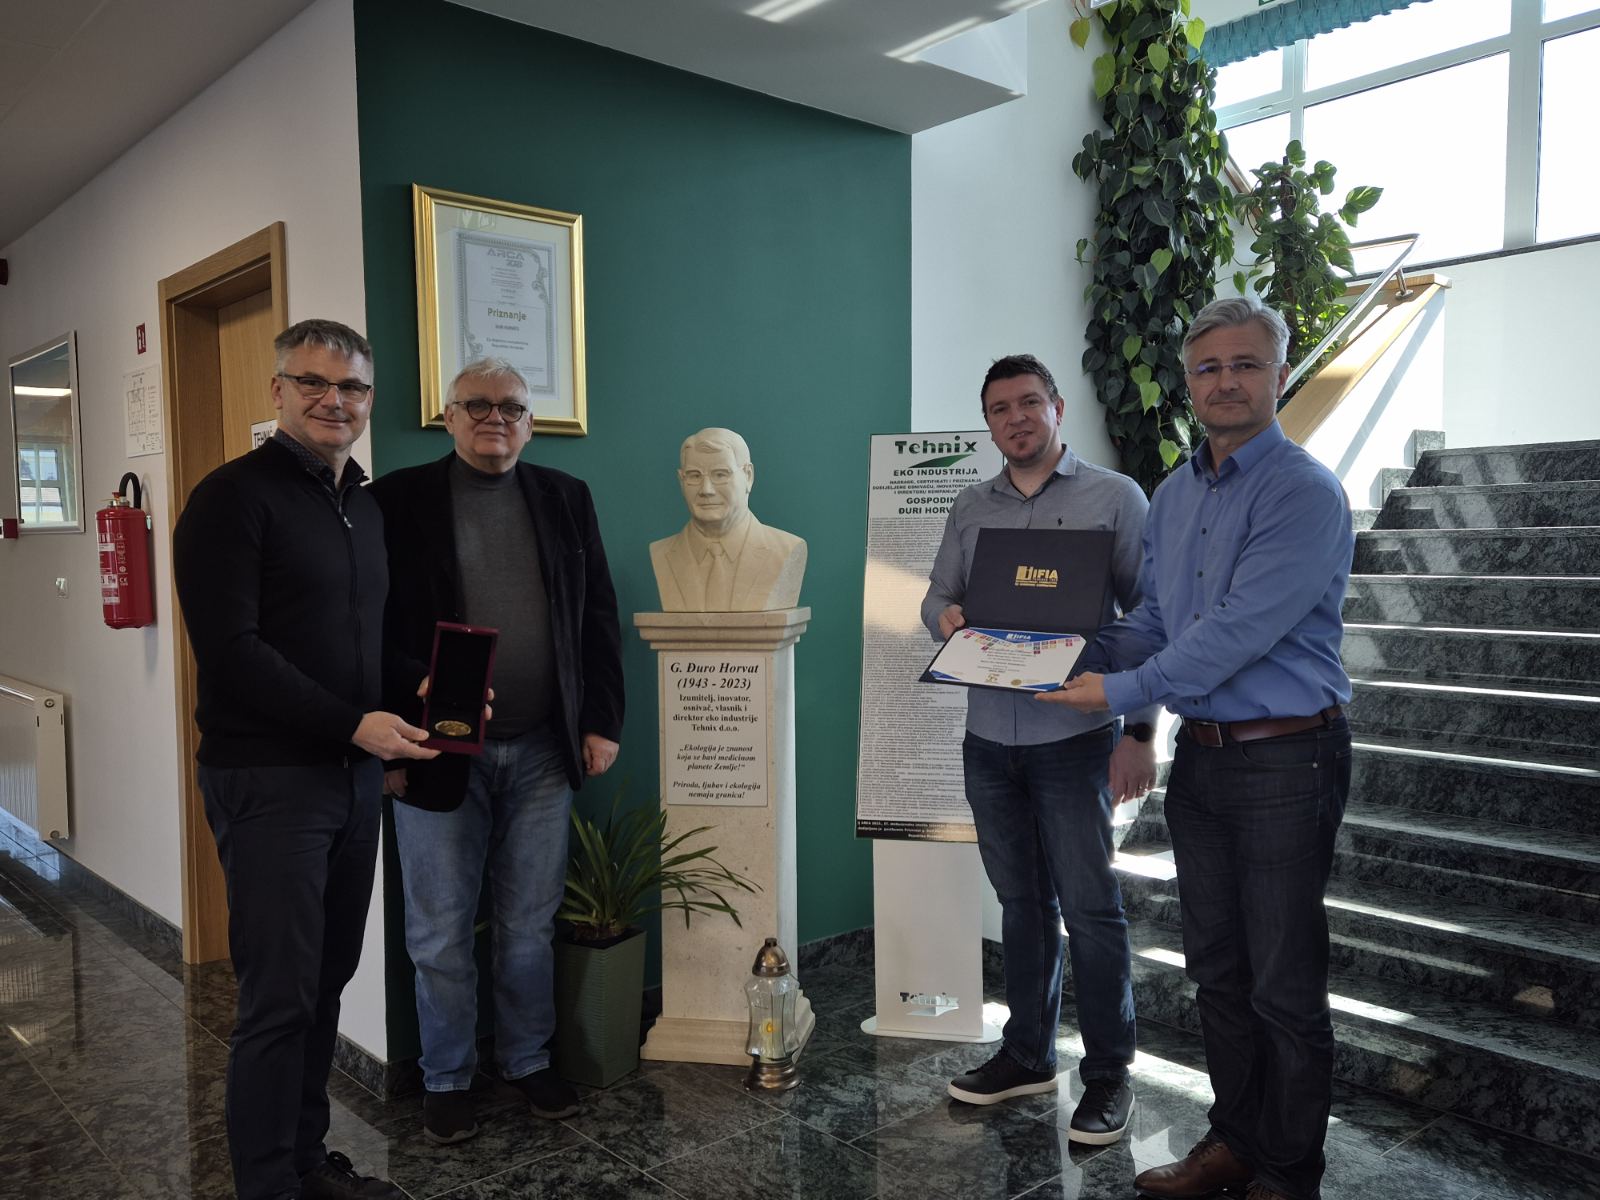 Croatian Association of Innovators Presented Awards and Prizes to the company Tehnix